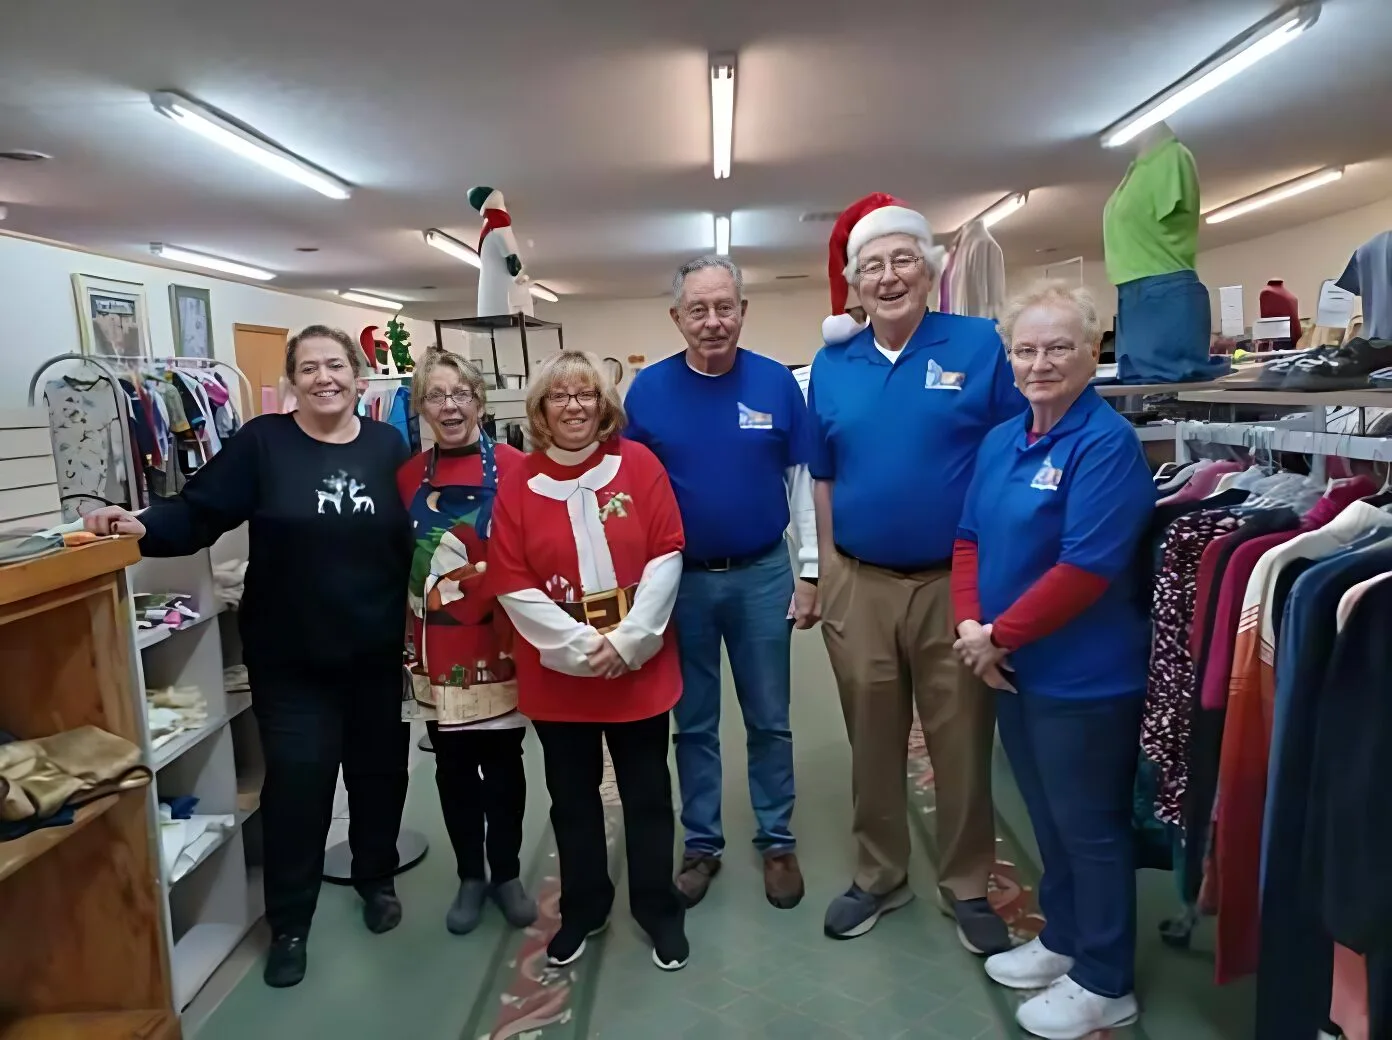 Church volunteers can be found at Portage County Clothing Center in Ravenna, Ohio. They are volunteering their time to help people in need.